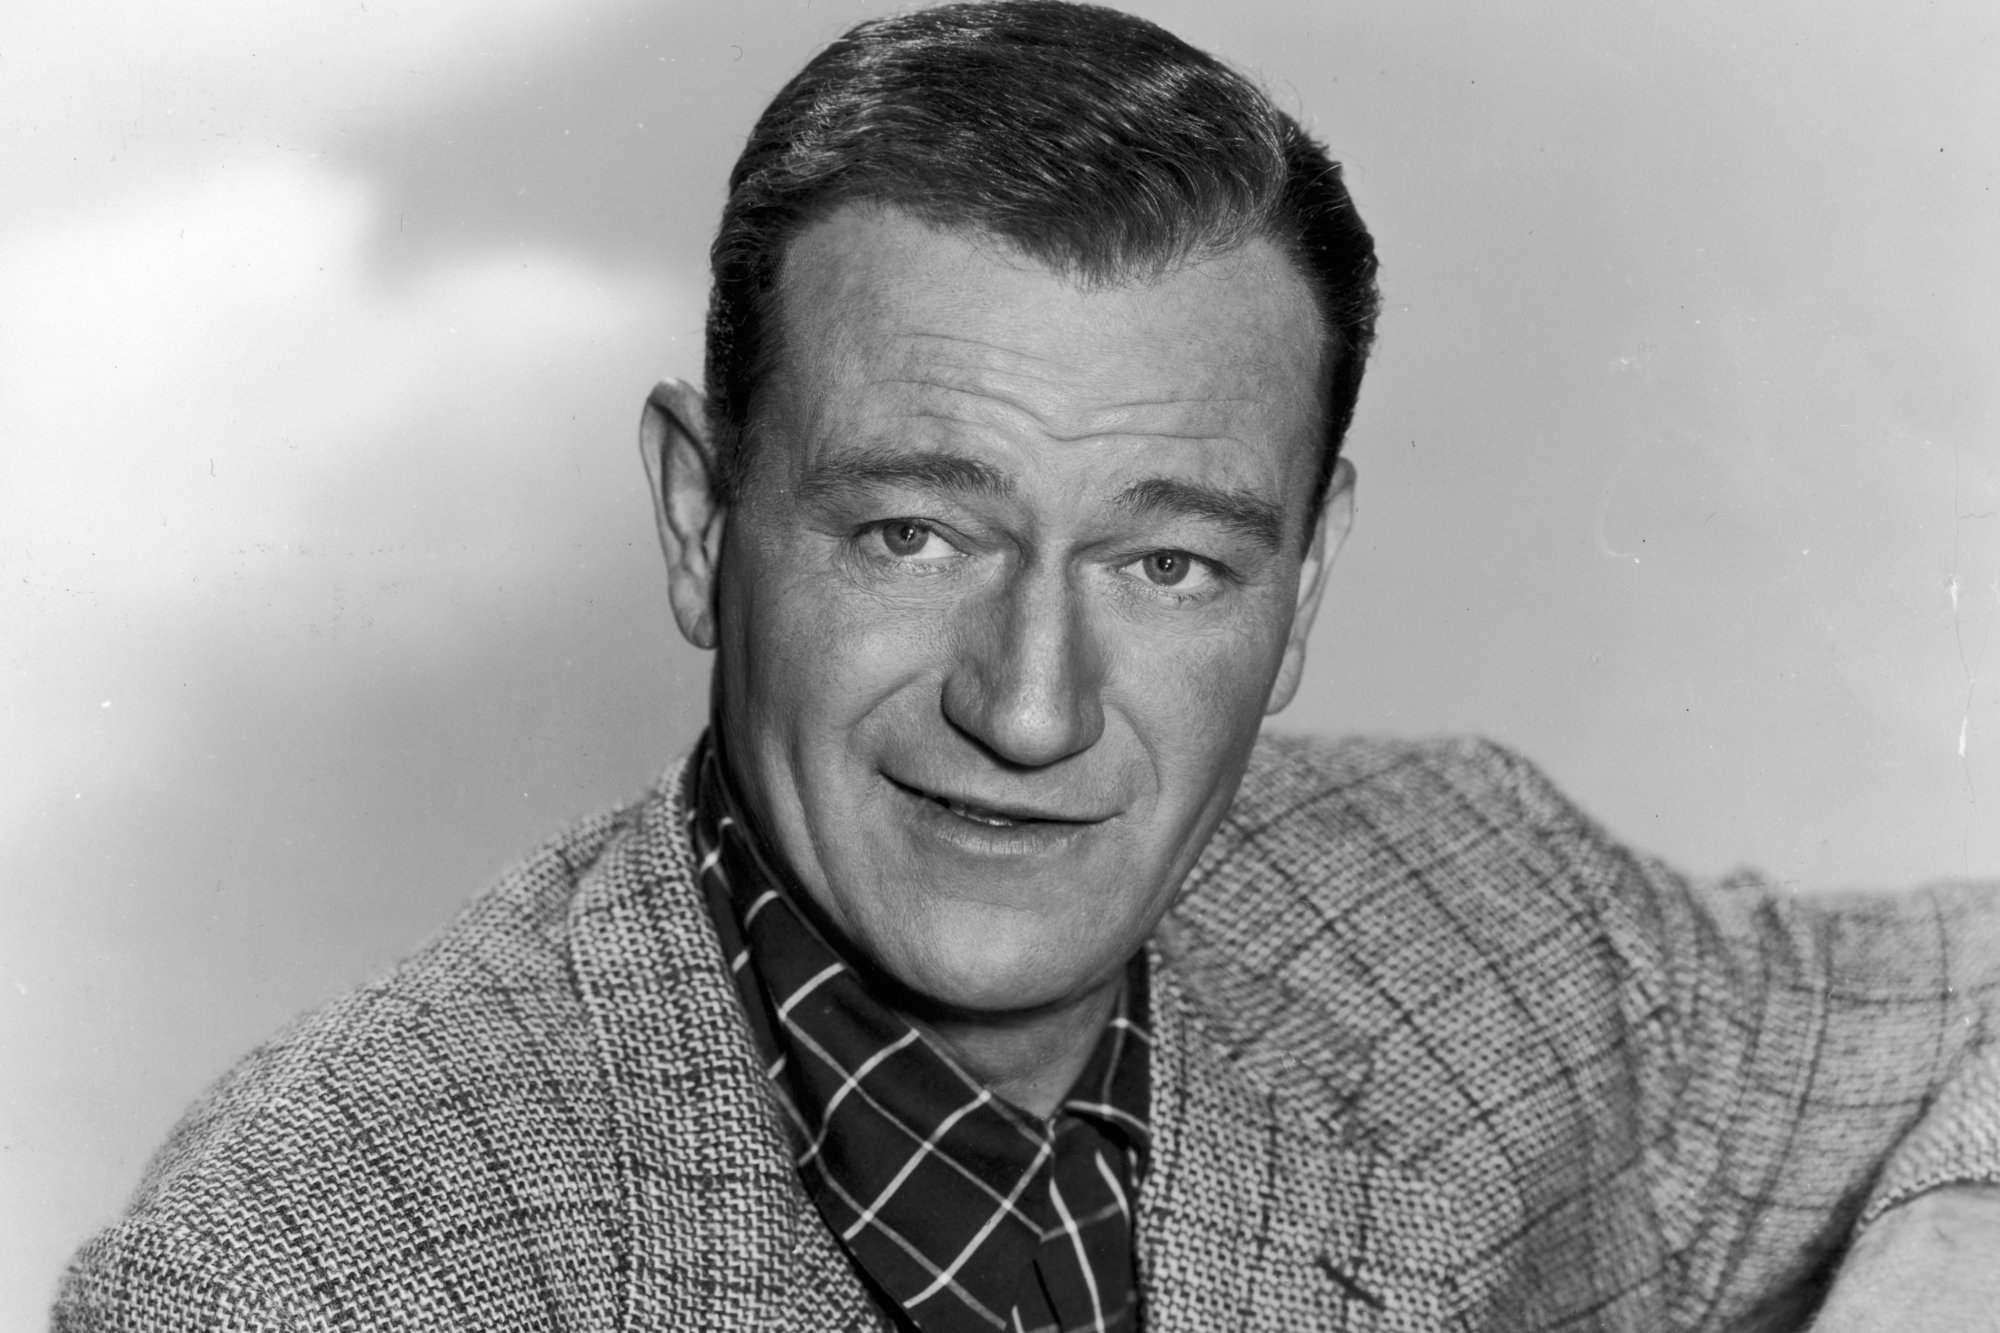 John Wayne, star of Western movies, in a black-and-white picture with a smile on his face.